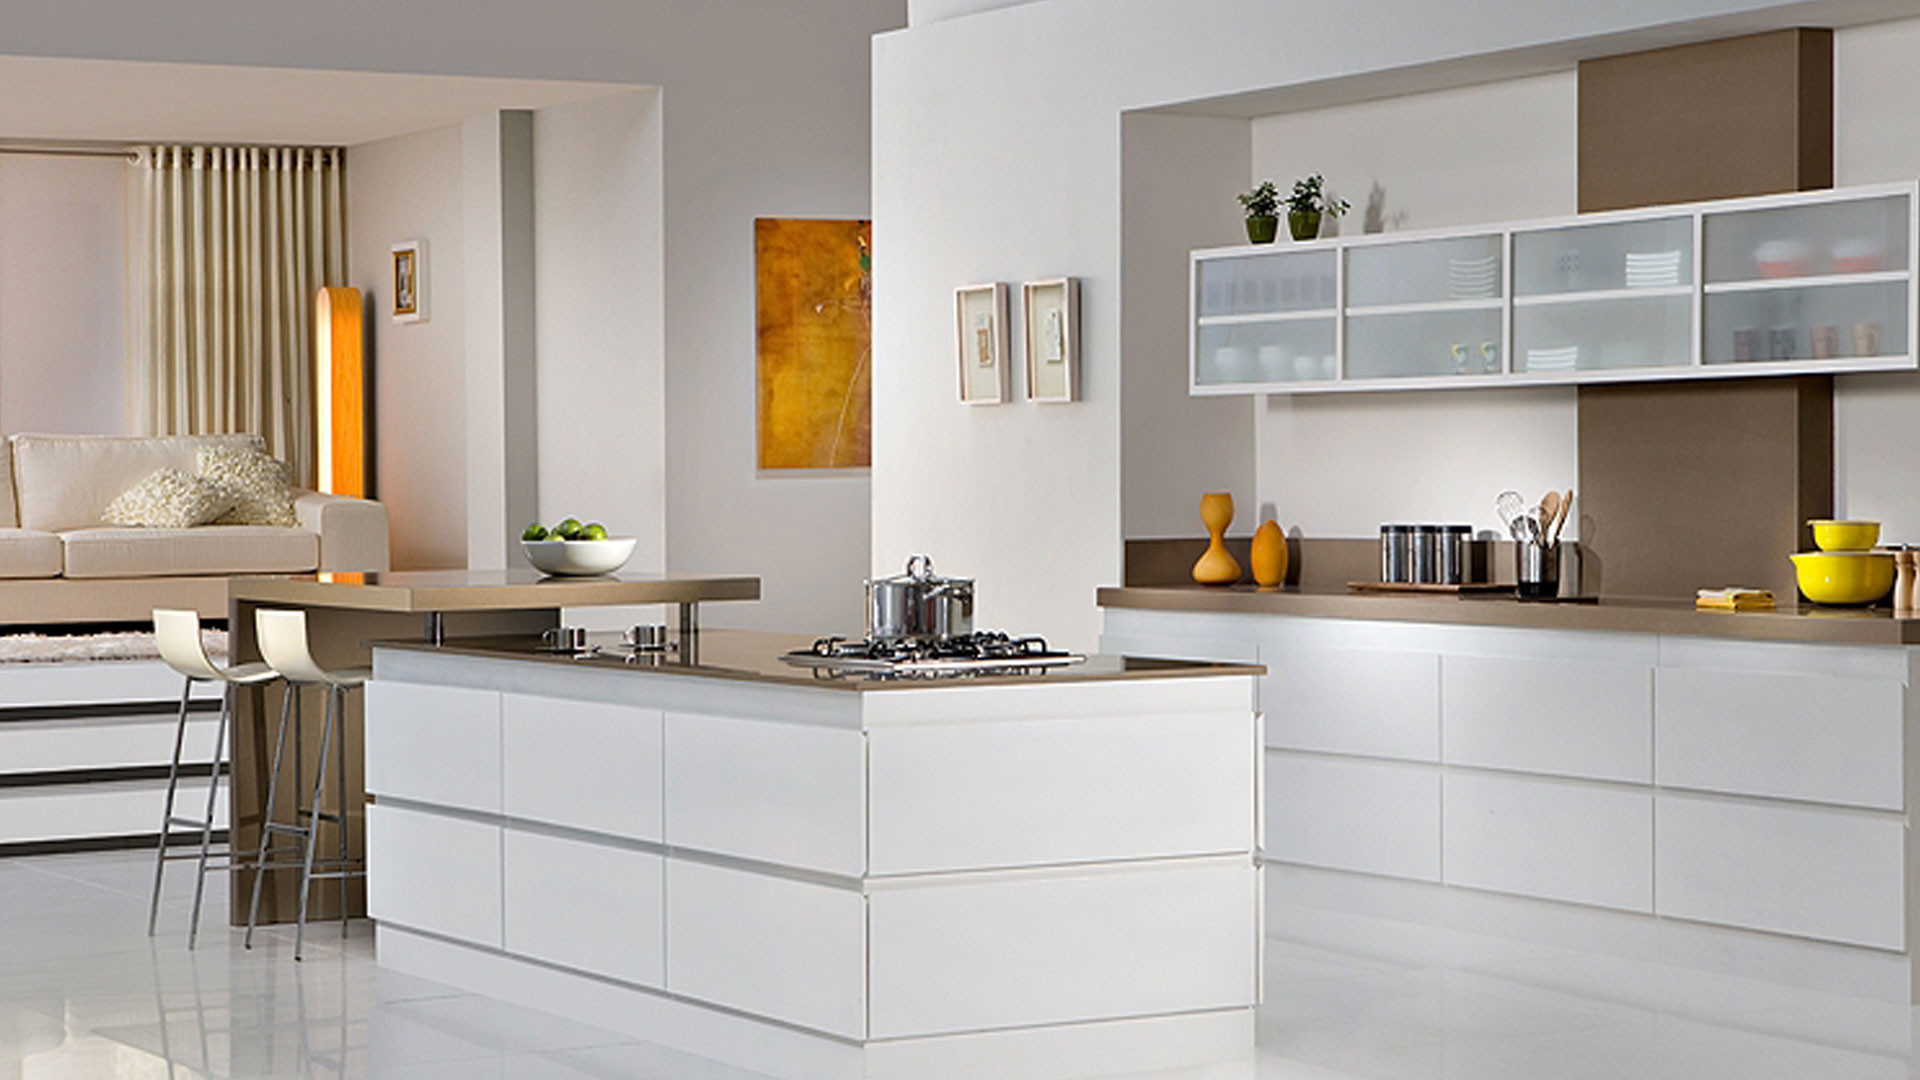 White Modern Kitchen Cabinets
 The Popularity of the White Kitchen Cabinets Amaza Design